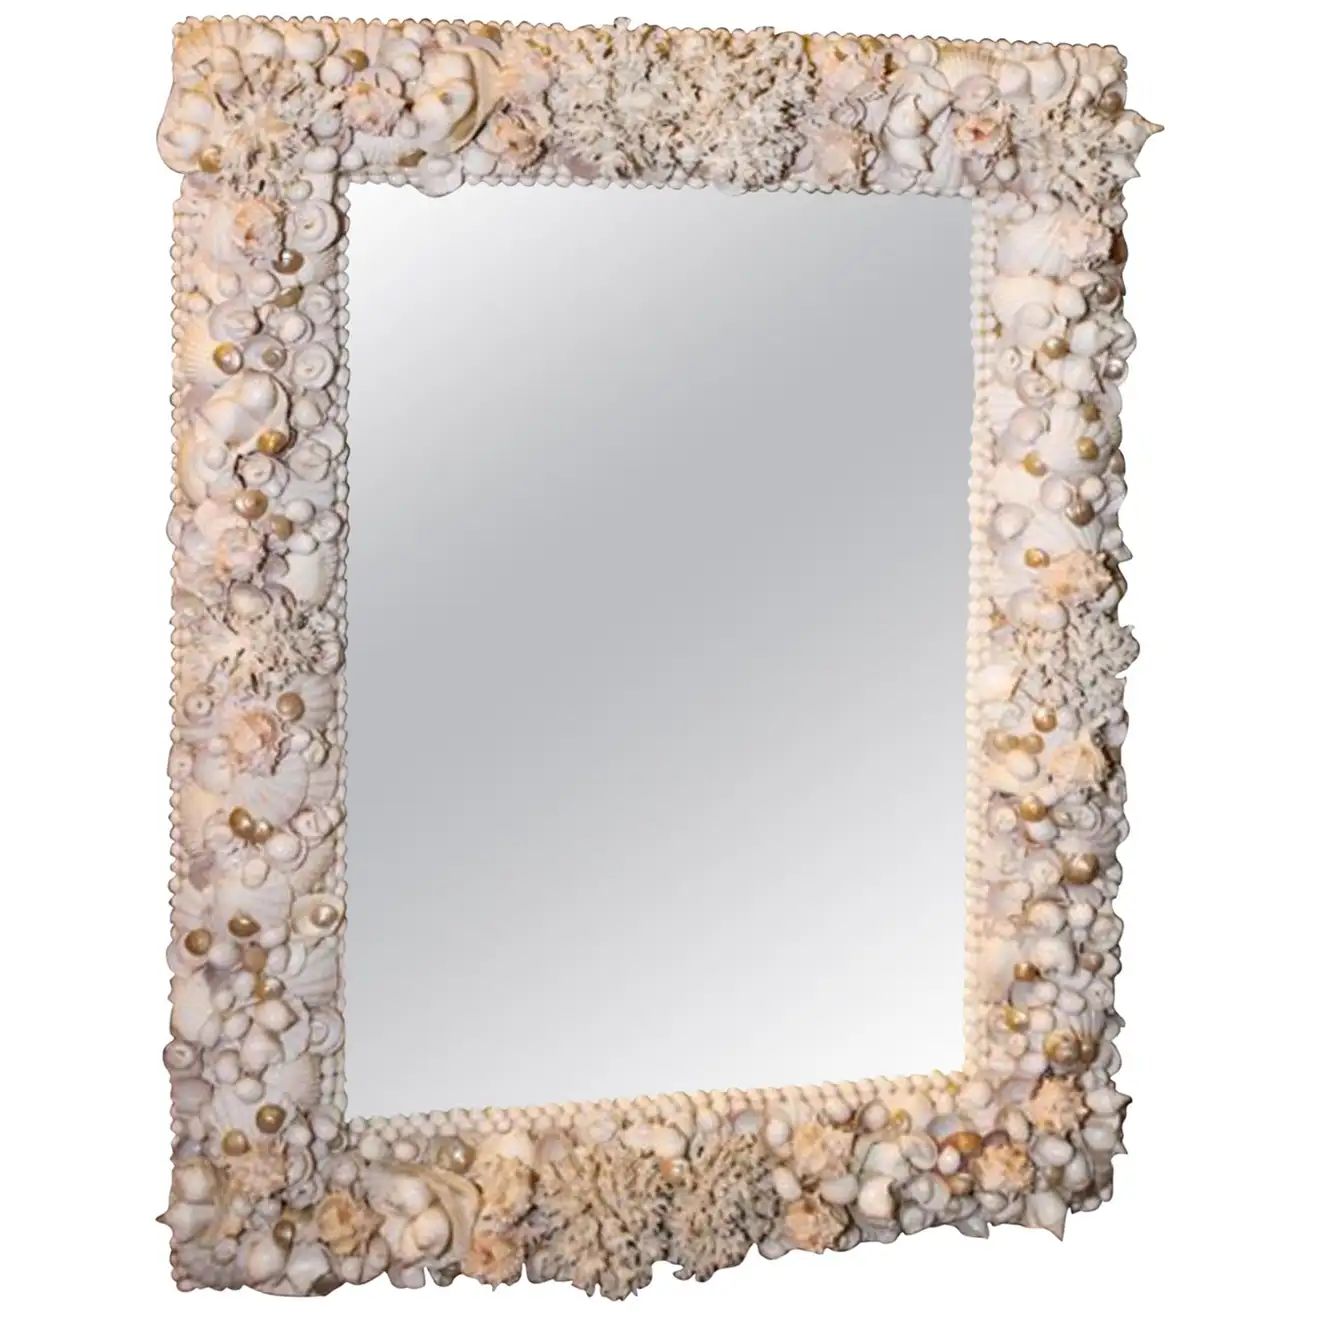 Grotto Style Shell Decorated Mirror 40" x 30" Great Composition, Detail & Depth | 1stDibs